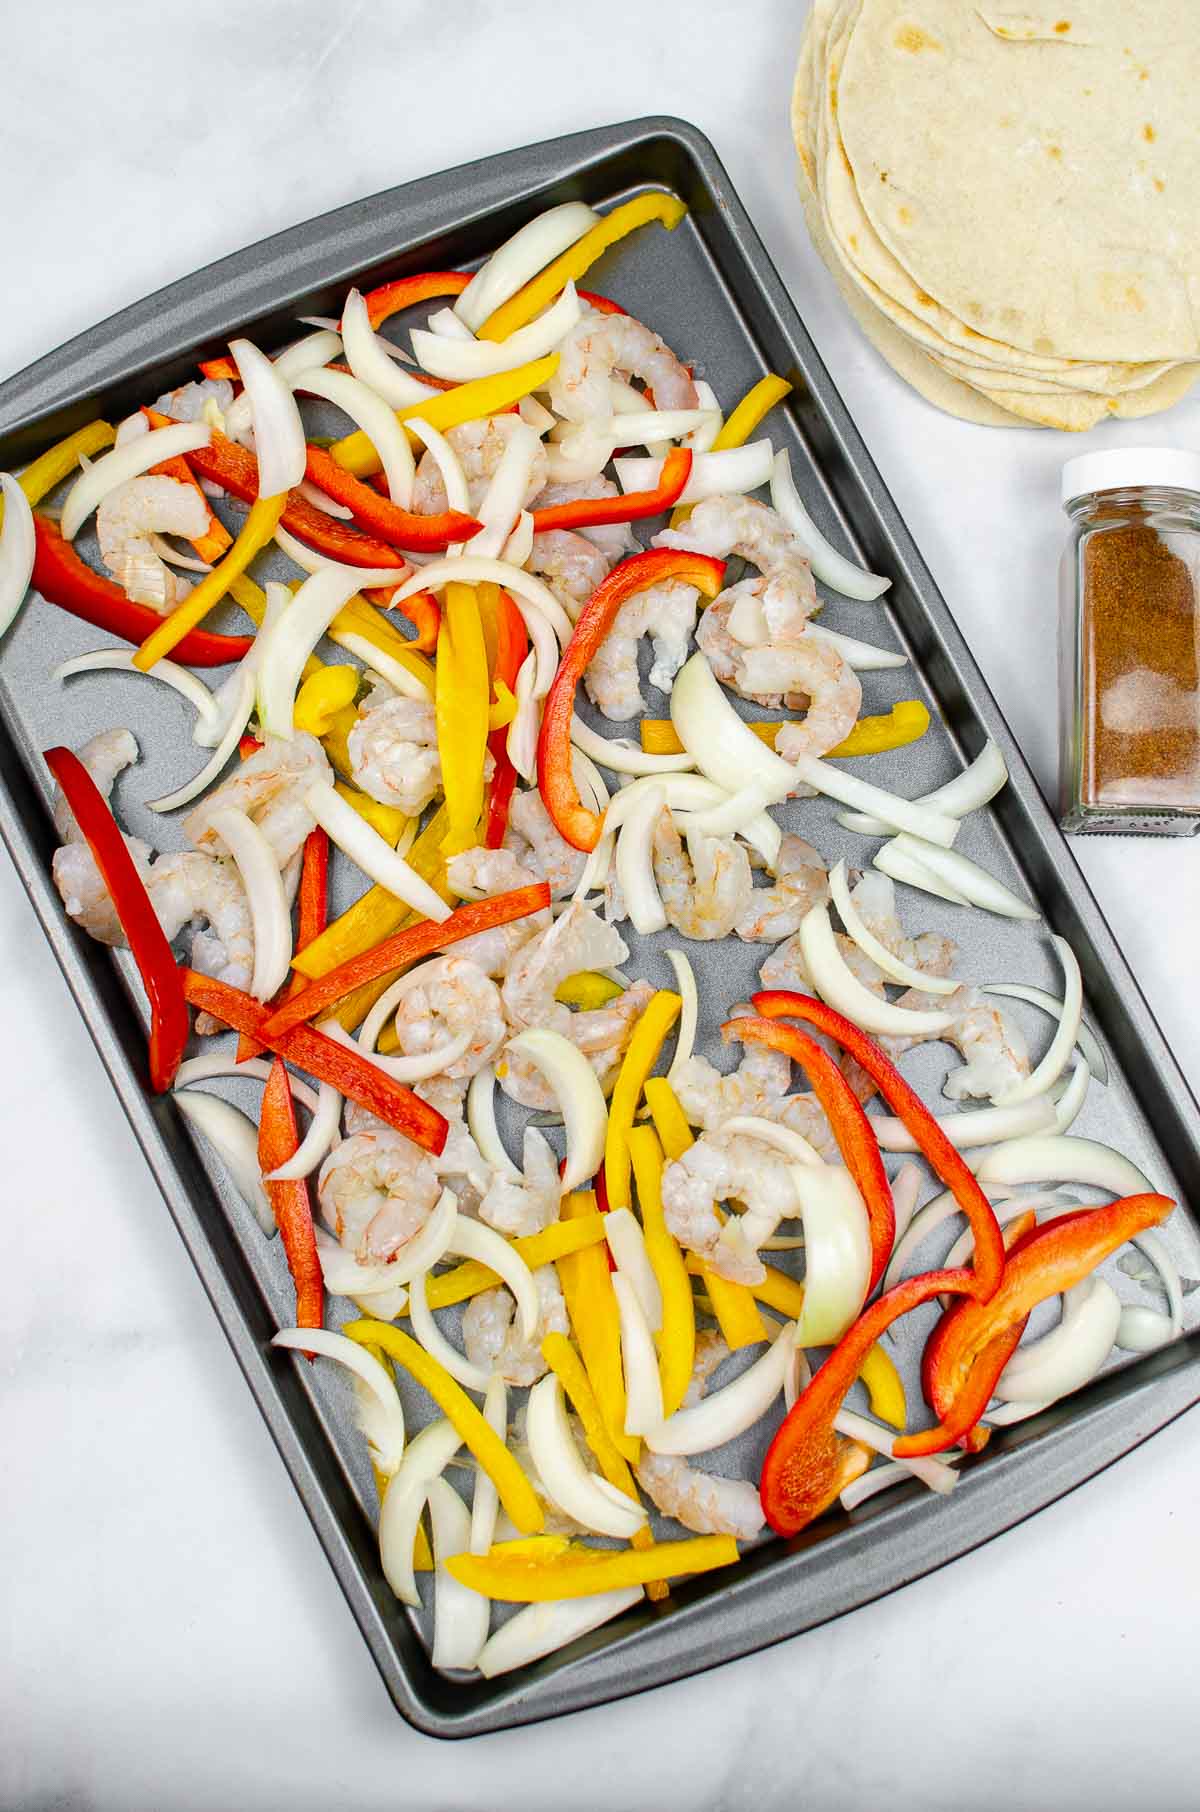 Sliced peppers, onions, and shrimp on a baking pan.